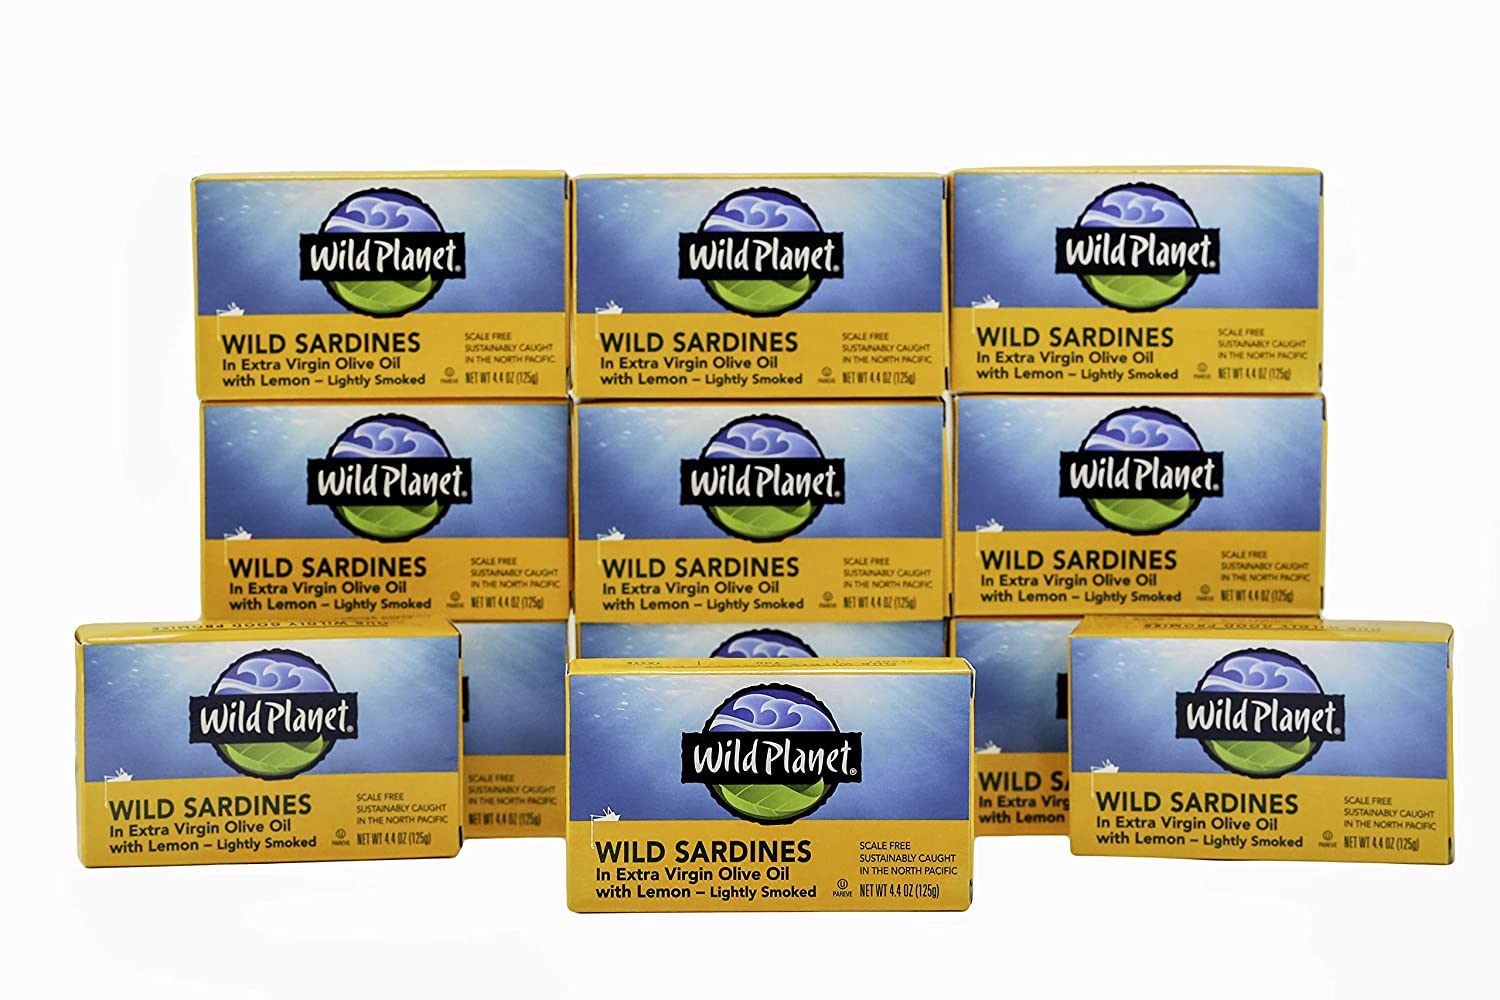 12-Pack 4.4-Oz Wild Planet Wild Sardines in Extra Virgin Olive Oil w/ Lemon $18.41 w/ S&S + Free Shipping w/ Prime or on orders over $25